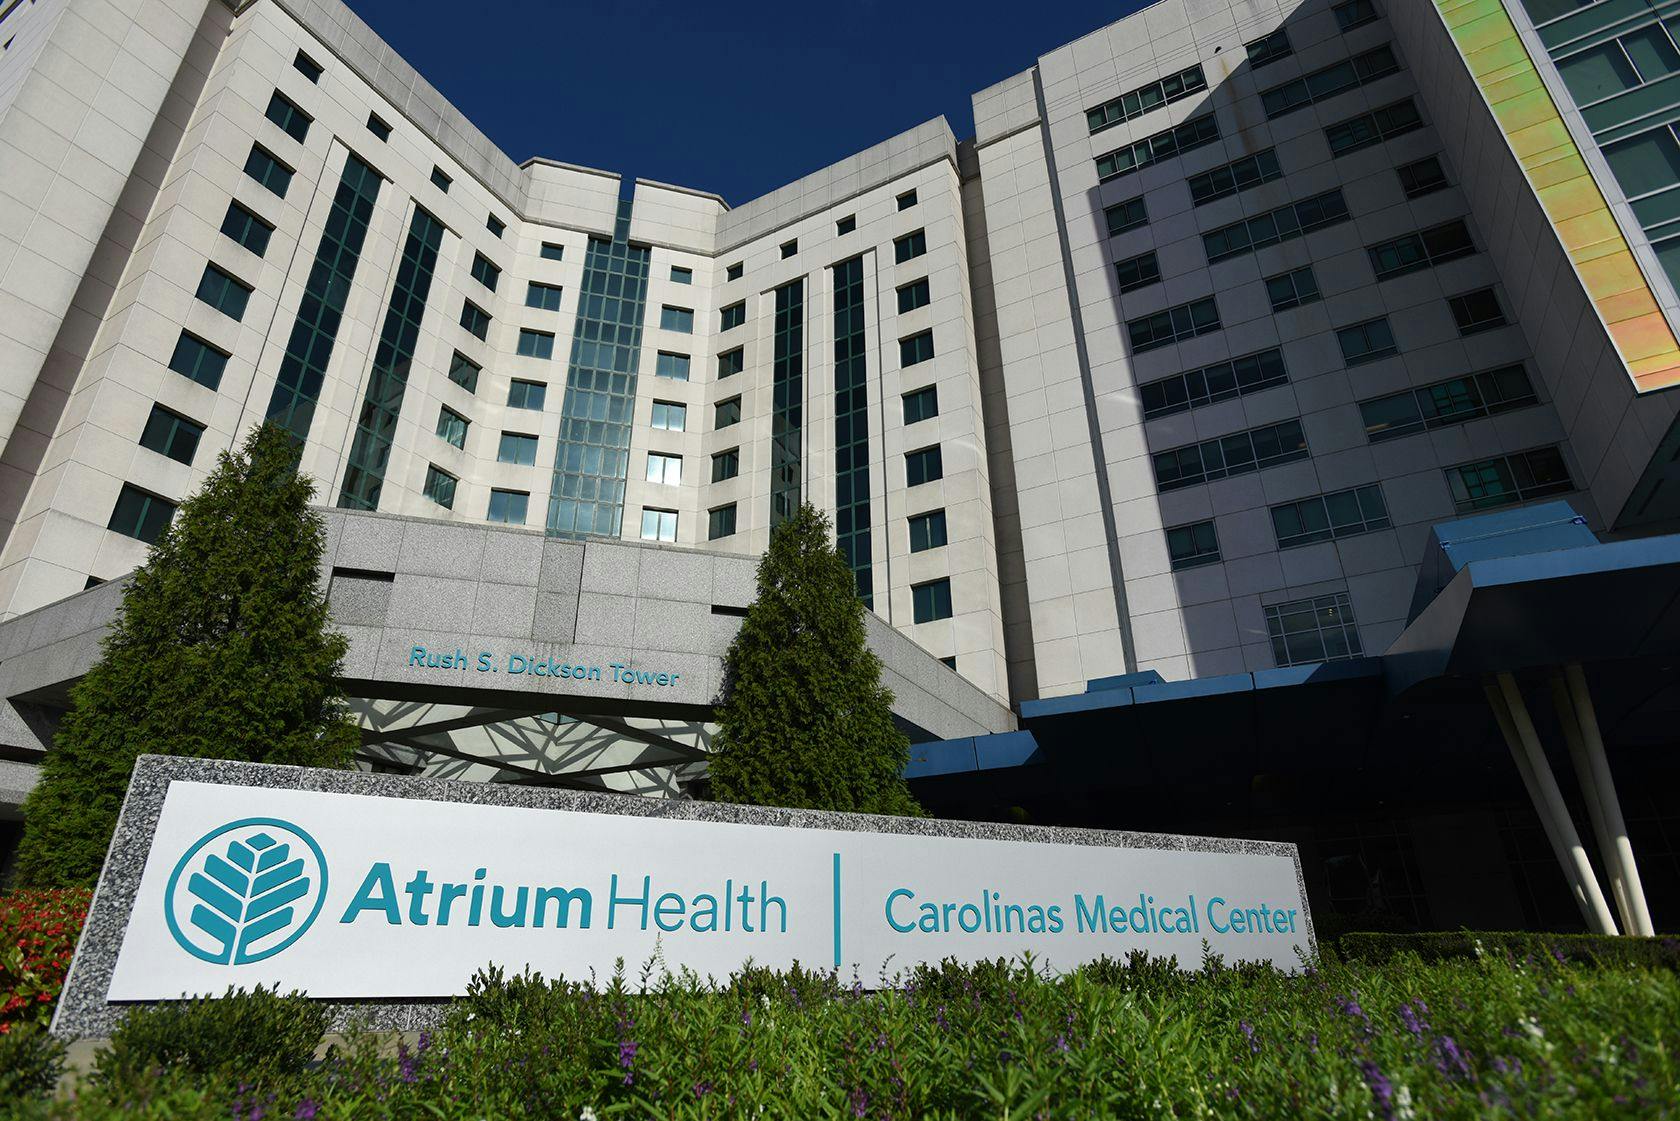 Atrium Health and Advocate Aurora Health announced in December that they completed the merger of the two systems. The merged organization is known as Advocate Health.